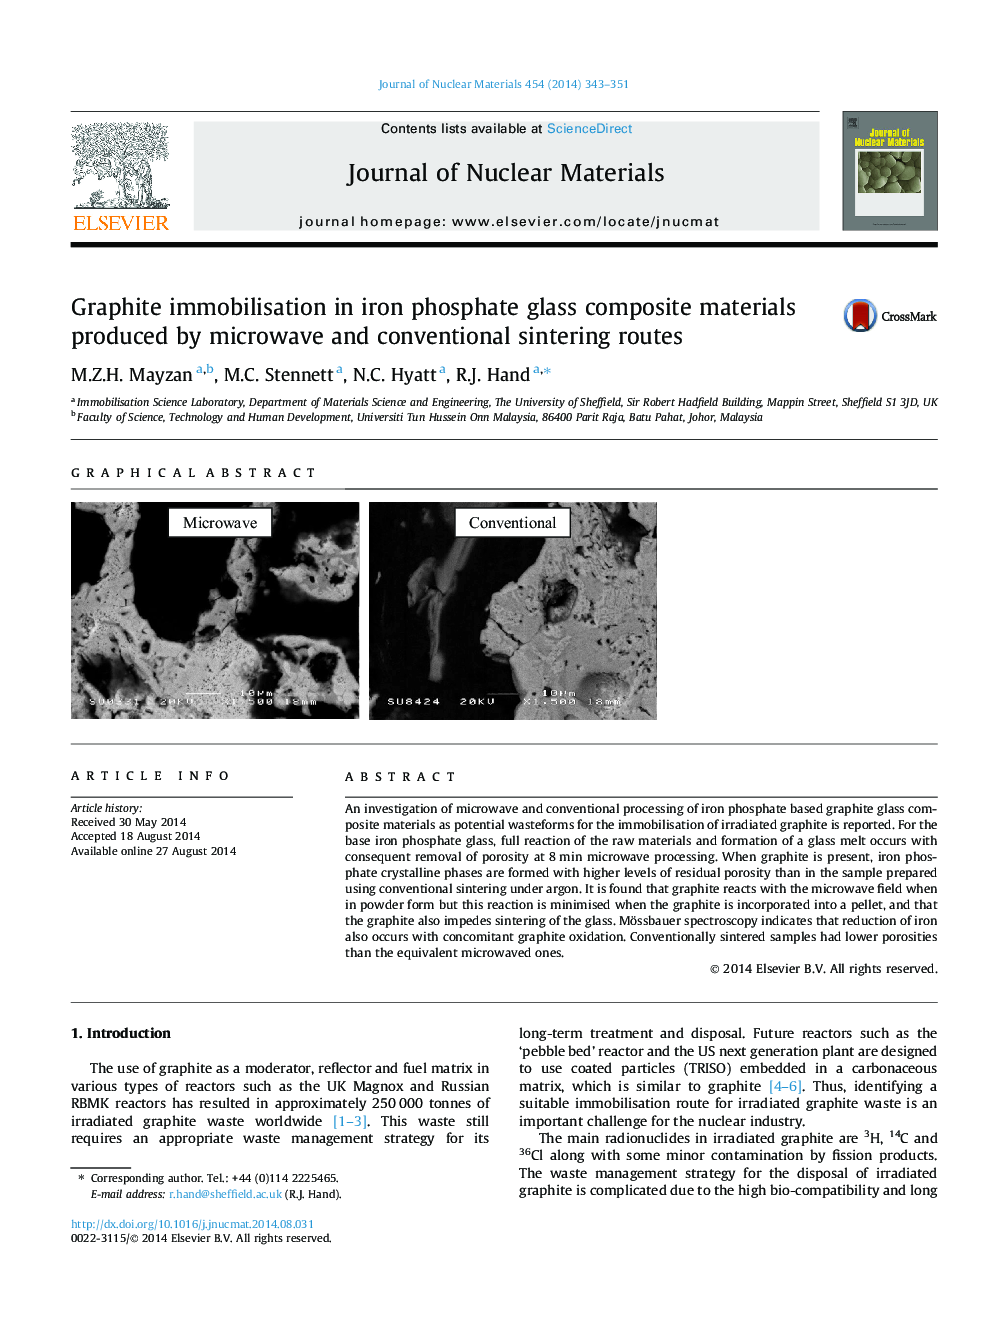 Graphite immobilisation in iron phosphate glass composite materials produced by microwave and conventional sintering routes